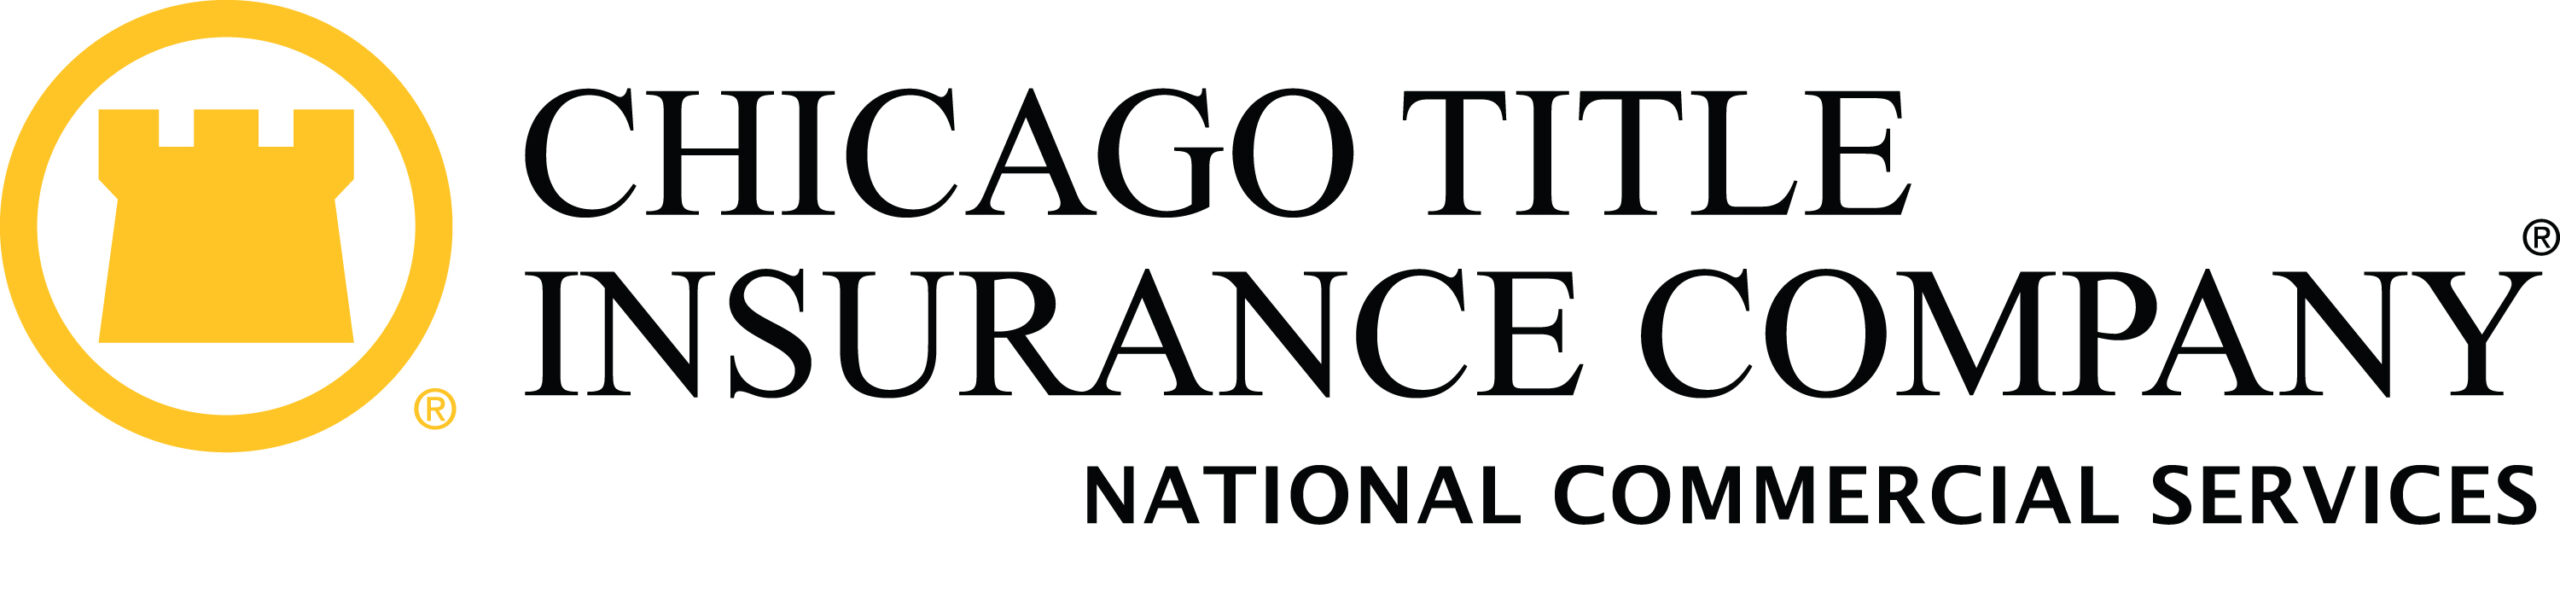 Chicago Title Insurance Company National Commercial Services